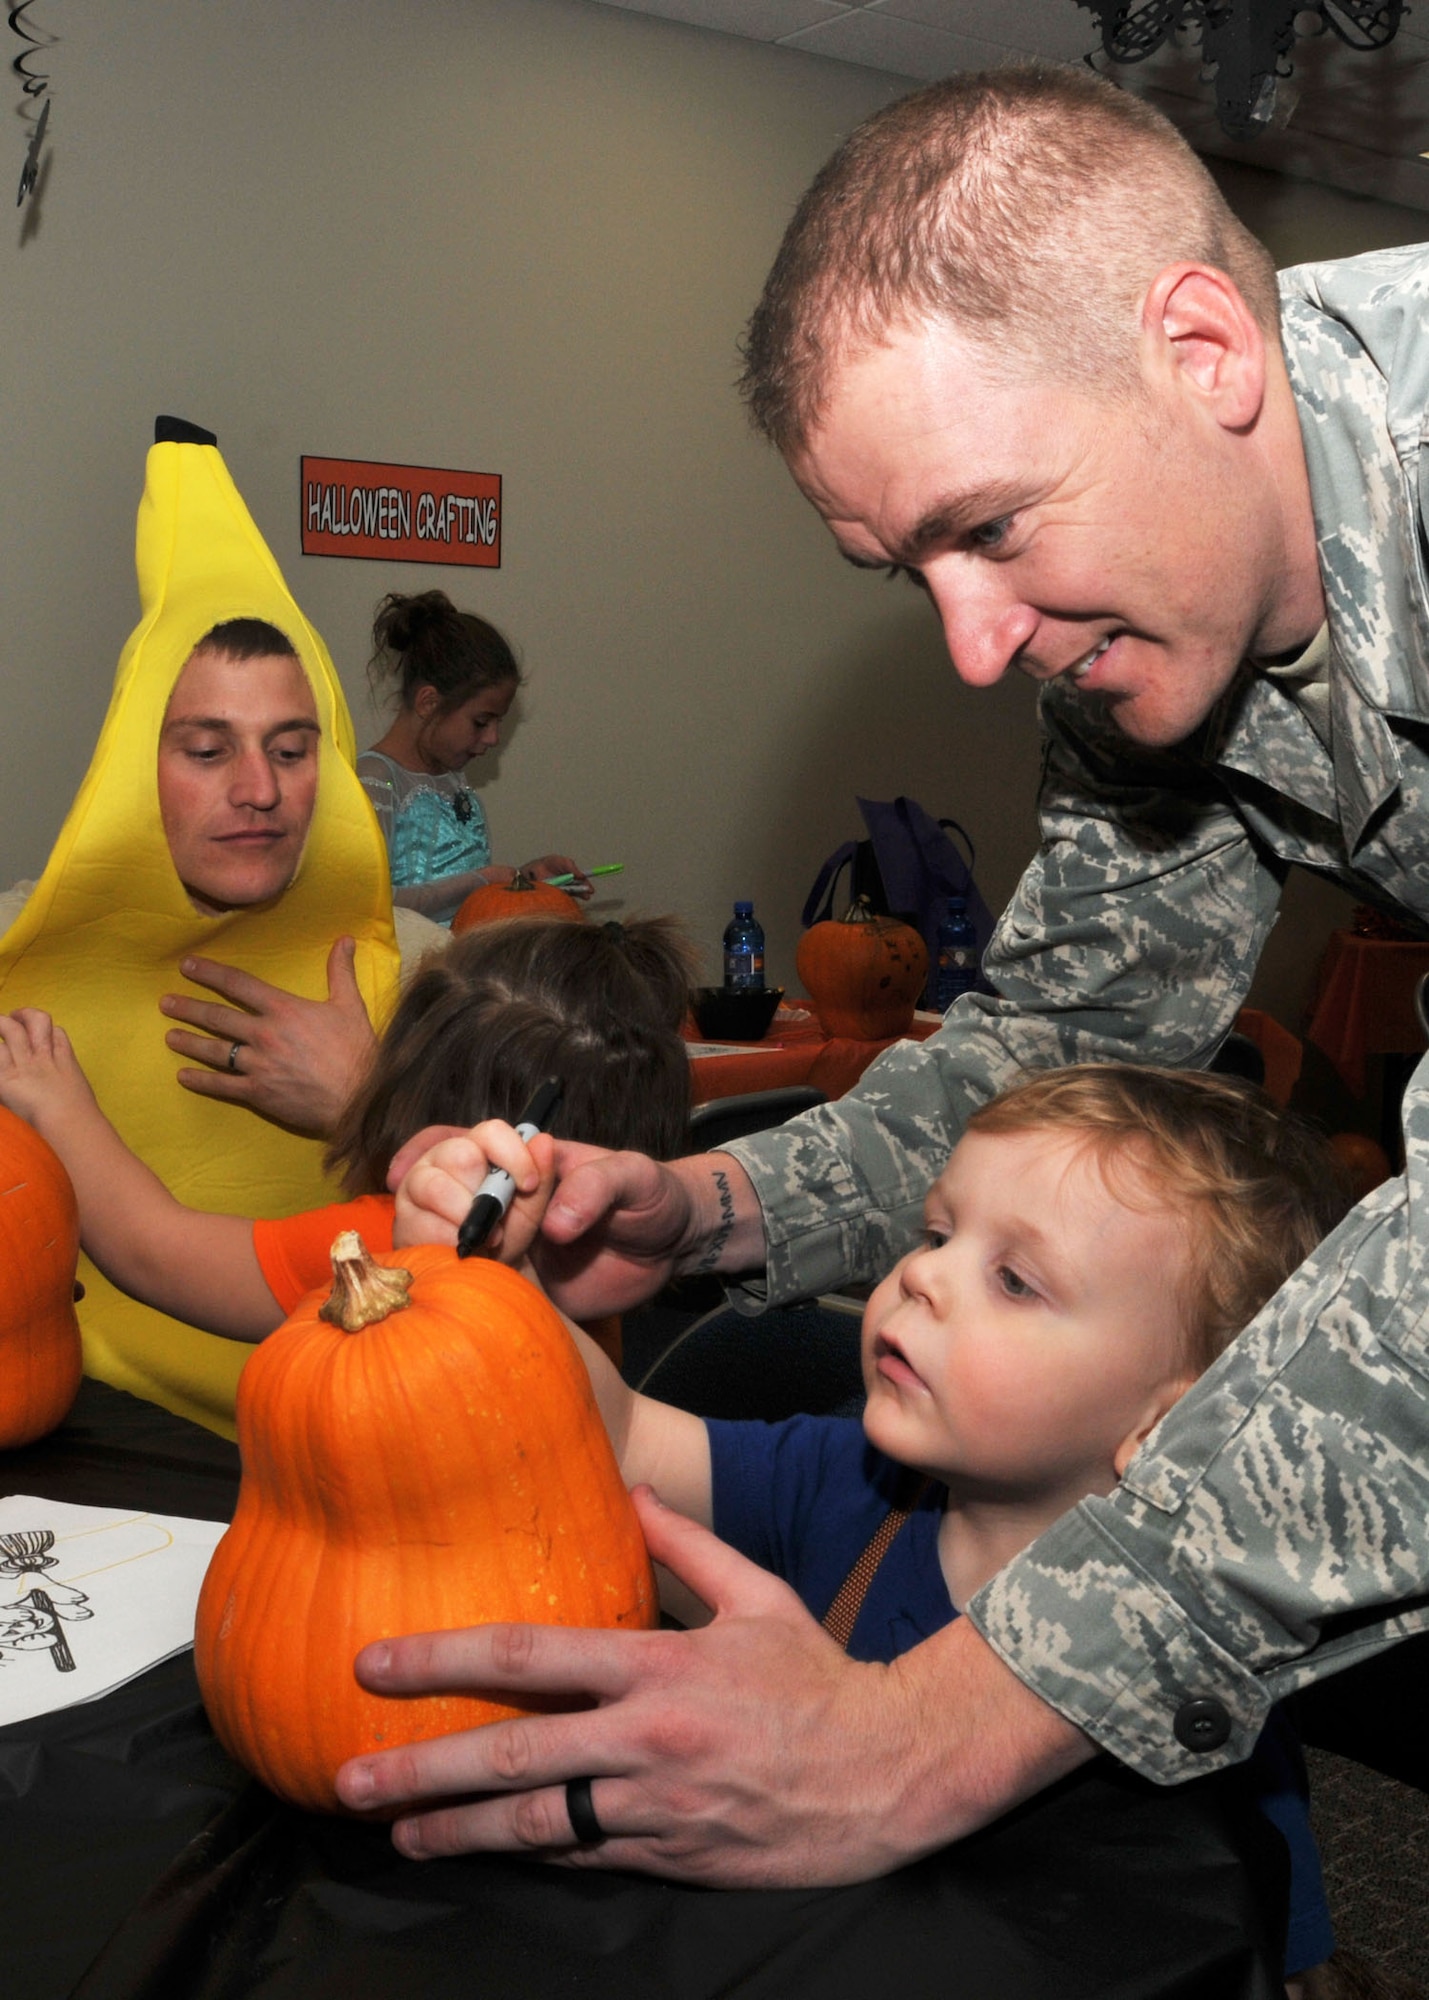 An Airman helps his son draw on a pumpkin during the Montana Air National Guard Airman and Family Readiness Program Halloween party held for children of guardsmen at the 120th Airlift Wing in Great Falls, Mont., Oct. 14, 2015.  (U.S. Air National Guard photo by Senior Master Sgt. Eric Peterson/Released)

